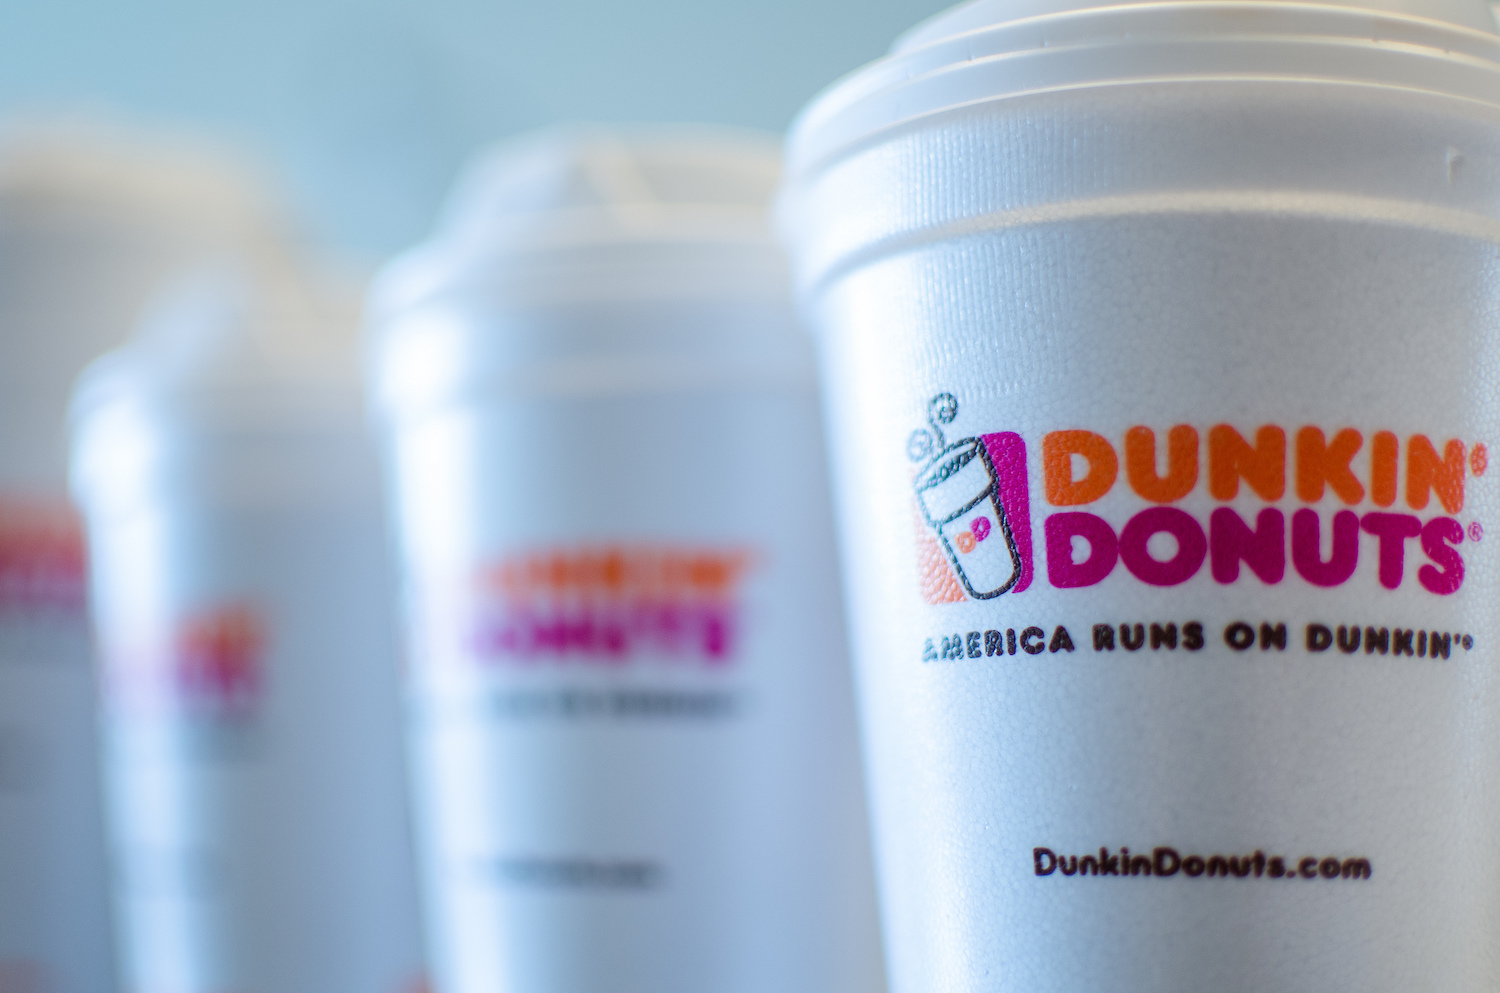 Dunkin Donuts and other fast food chains promise to end exploitative no-poach agreements. Credit: m01229 / Flickr, March 2019